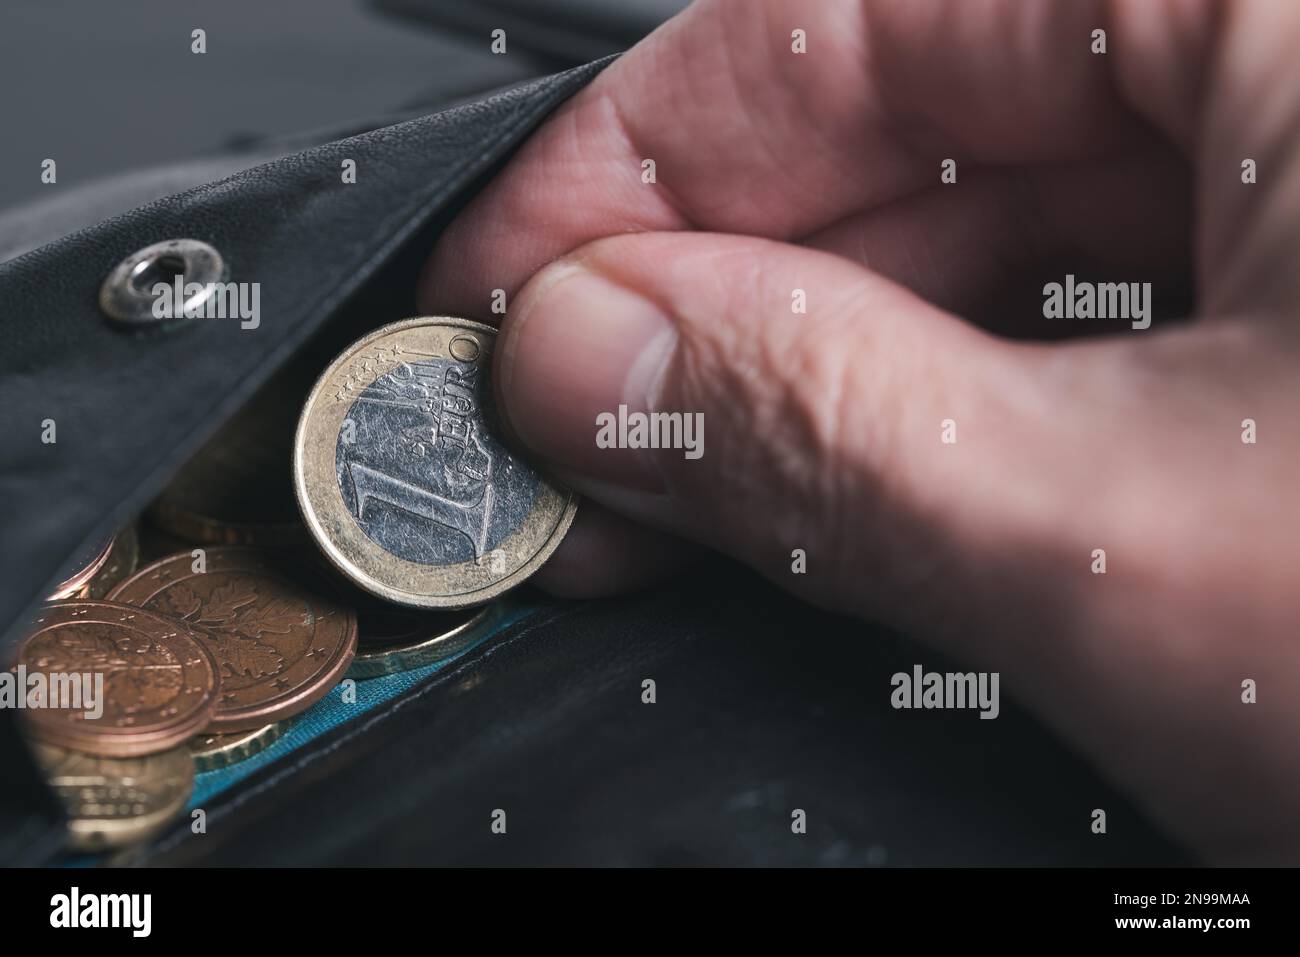 close-up of person picking 1 Euro coin from wallet, spending money business concept Stock Photo